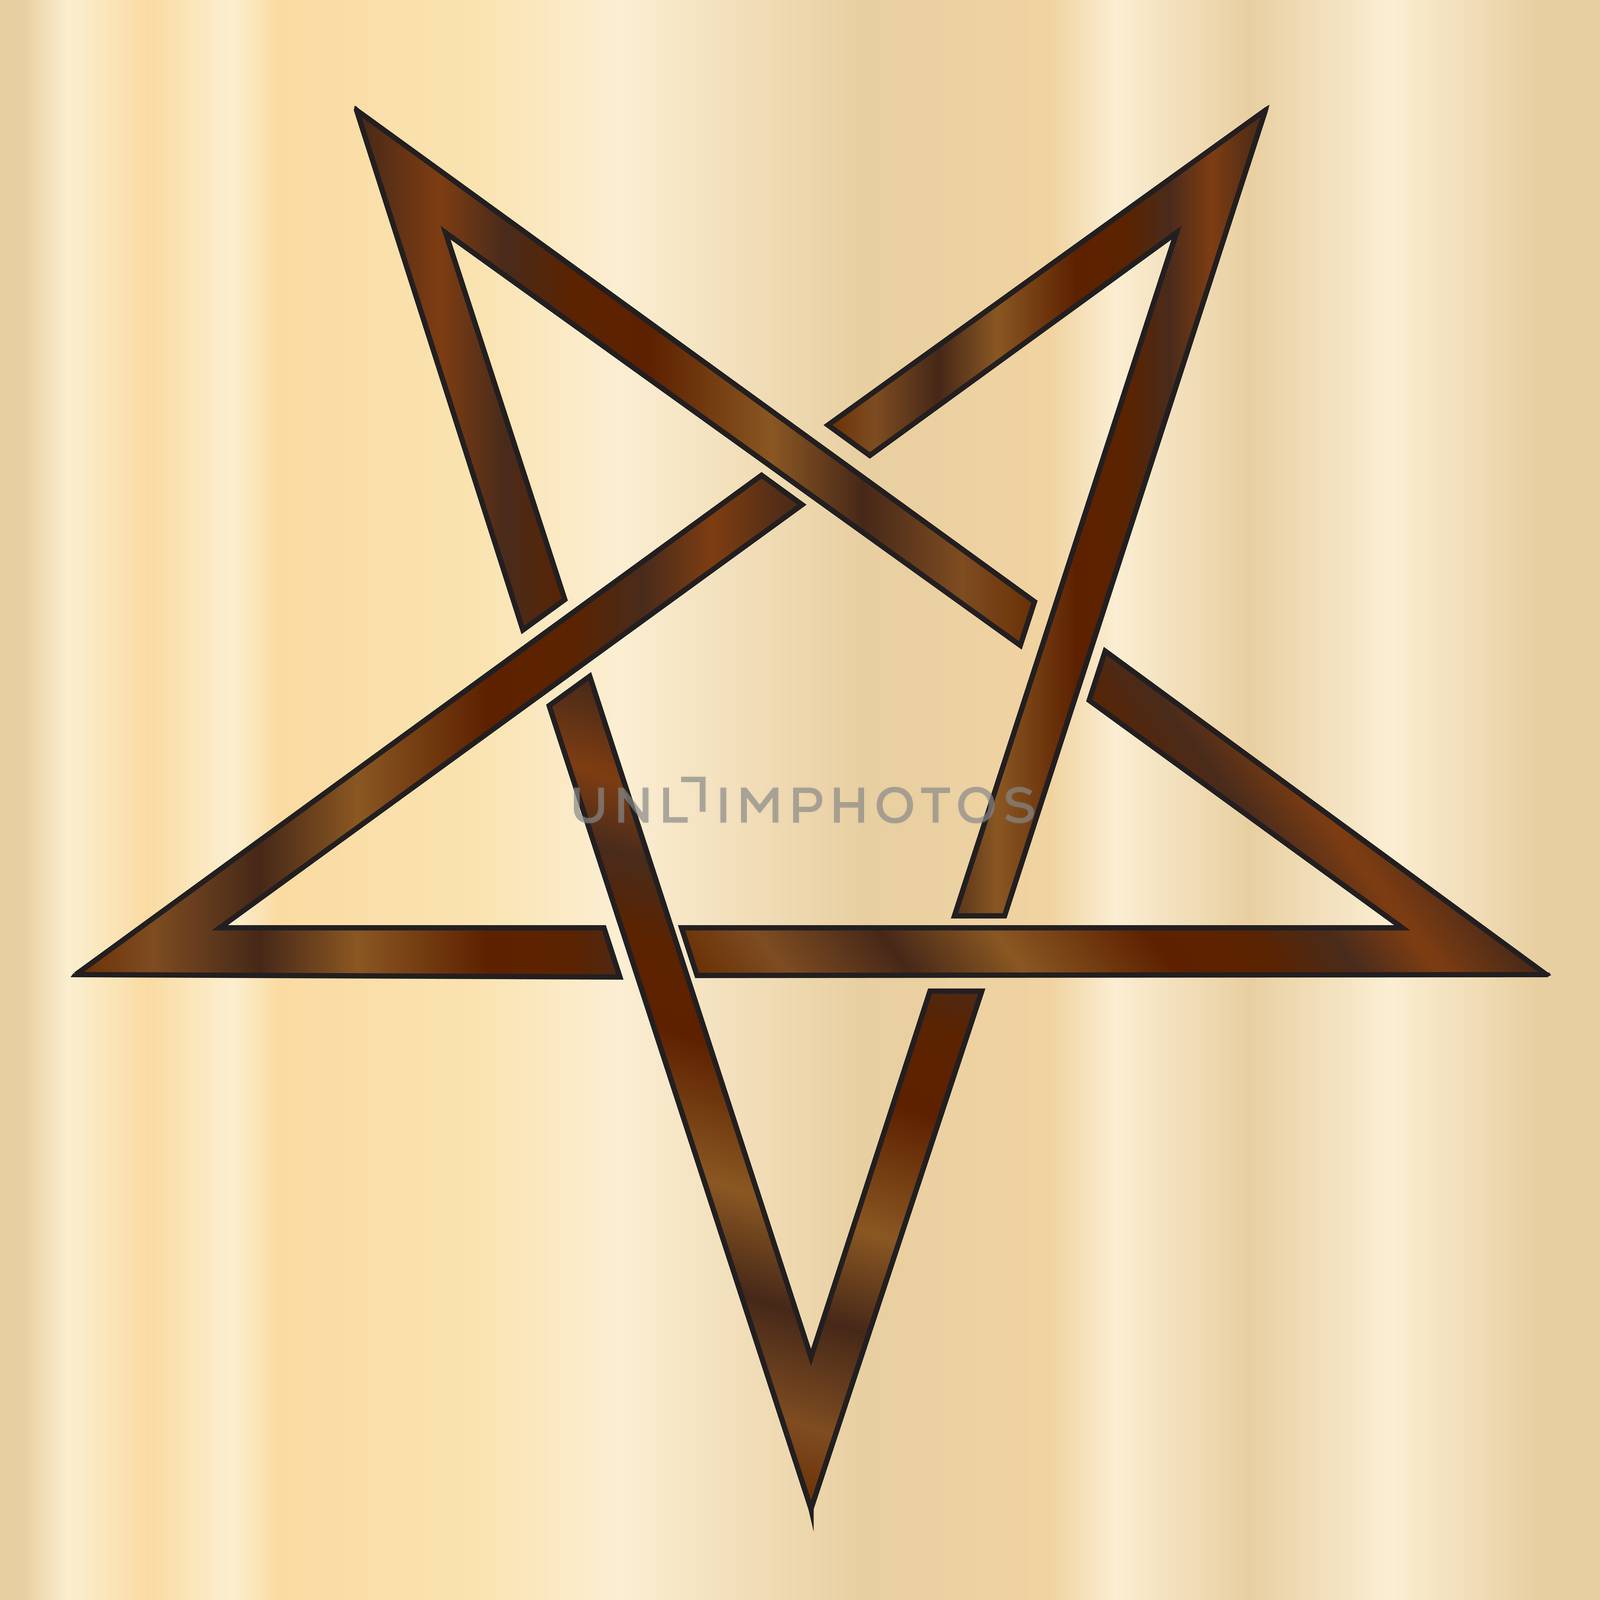 The ancient symbol the pentangle in dark woods over a lighter wooden background